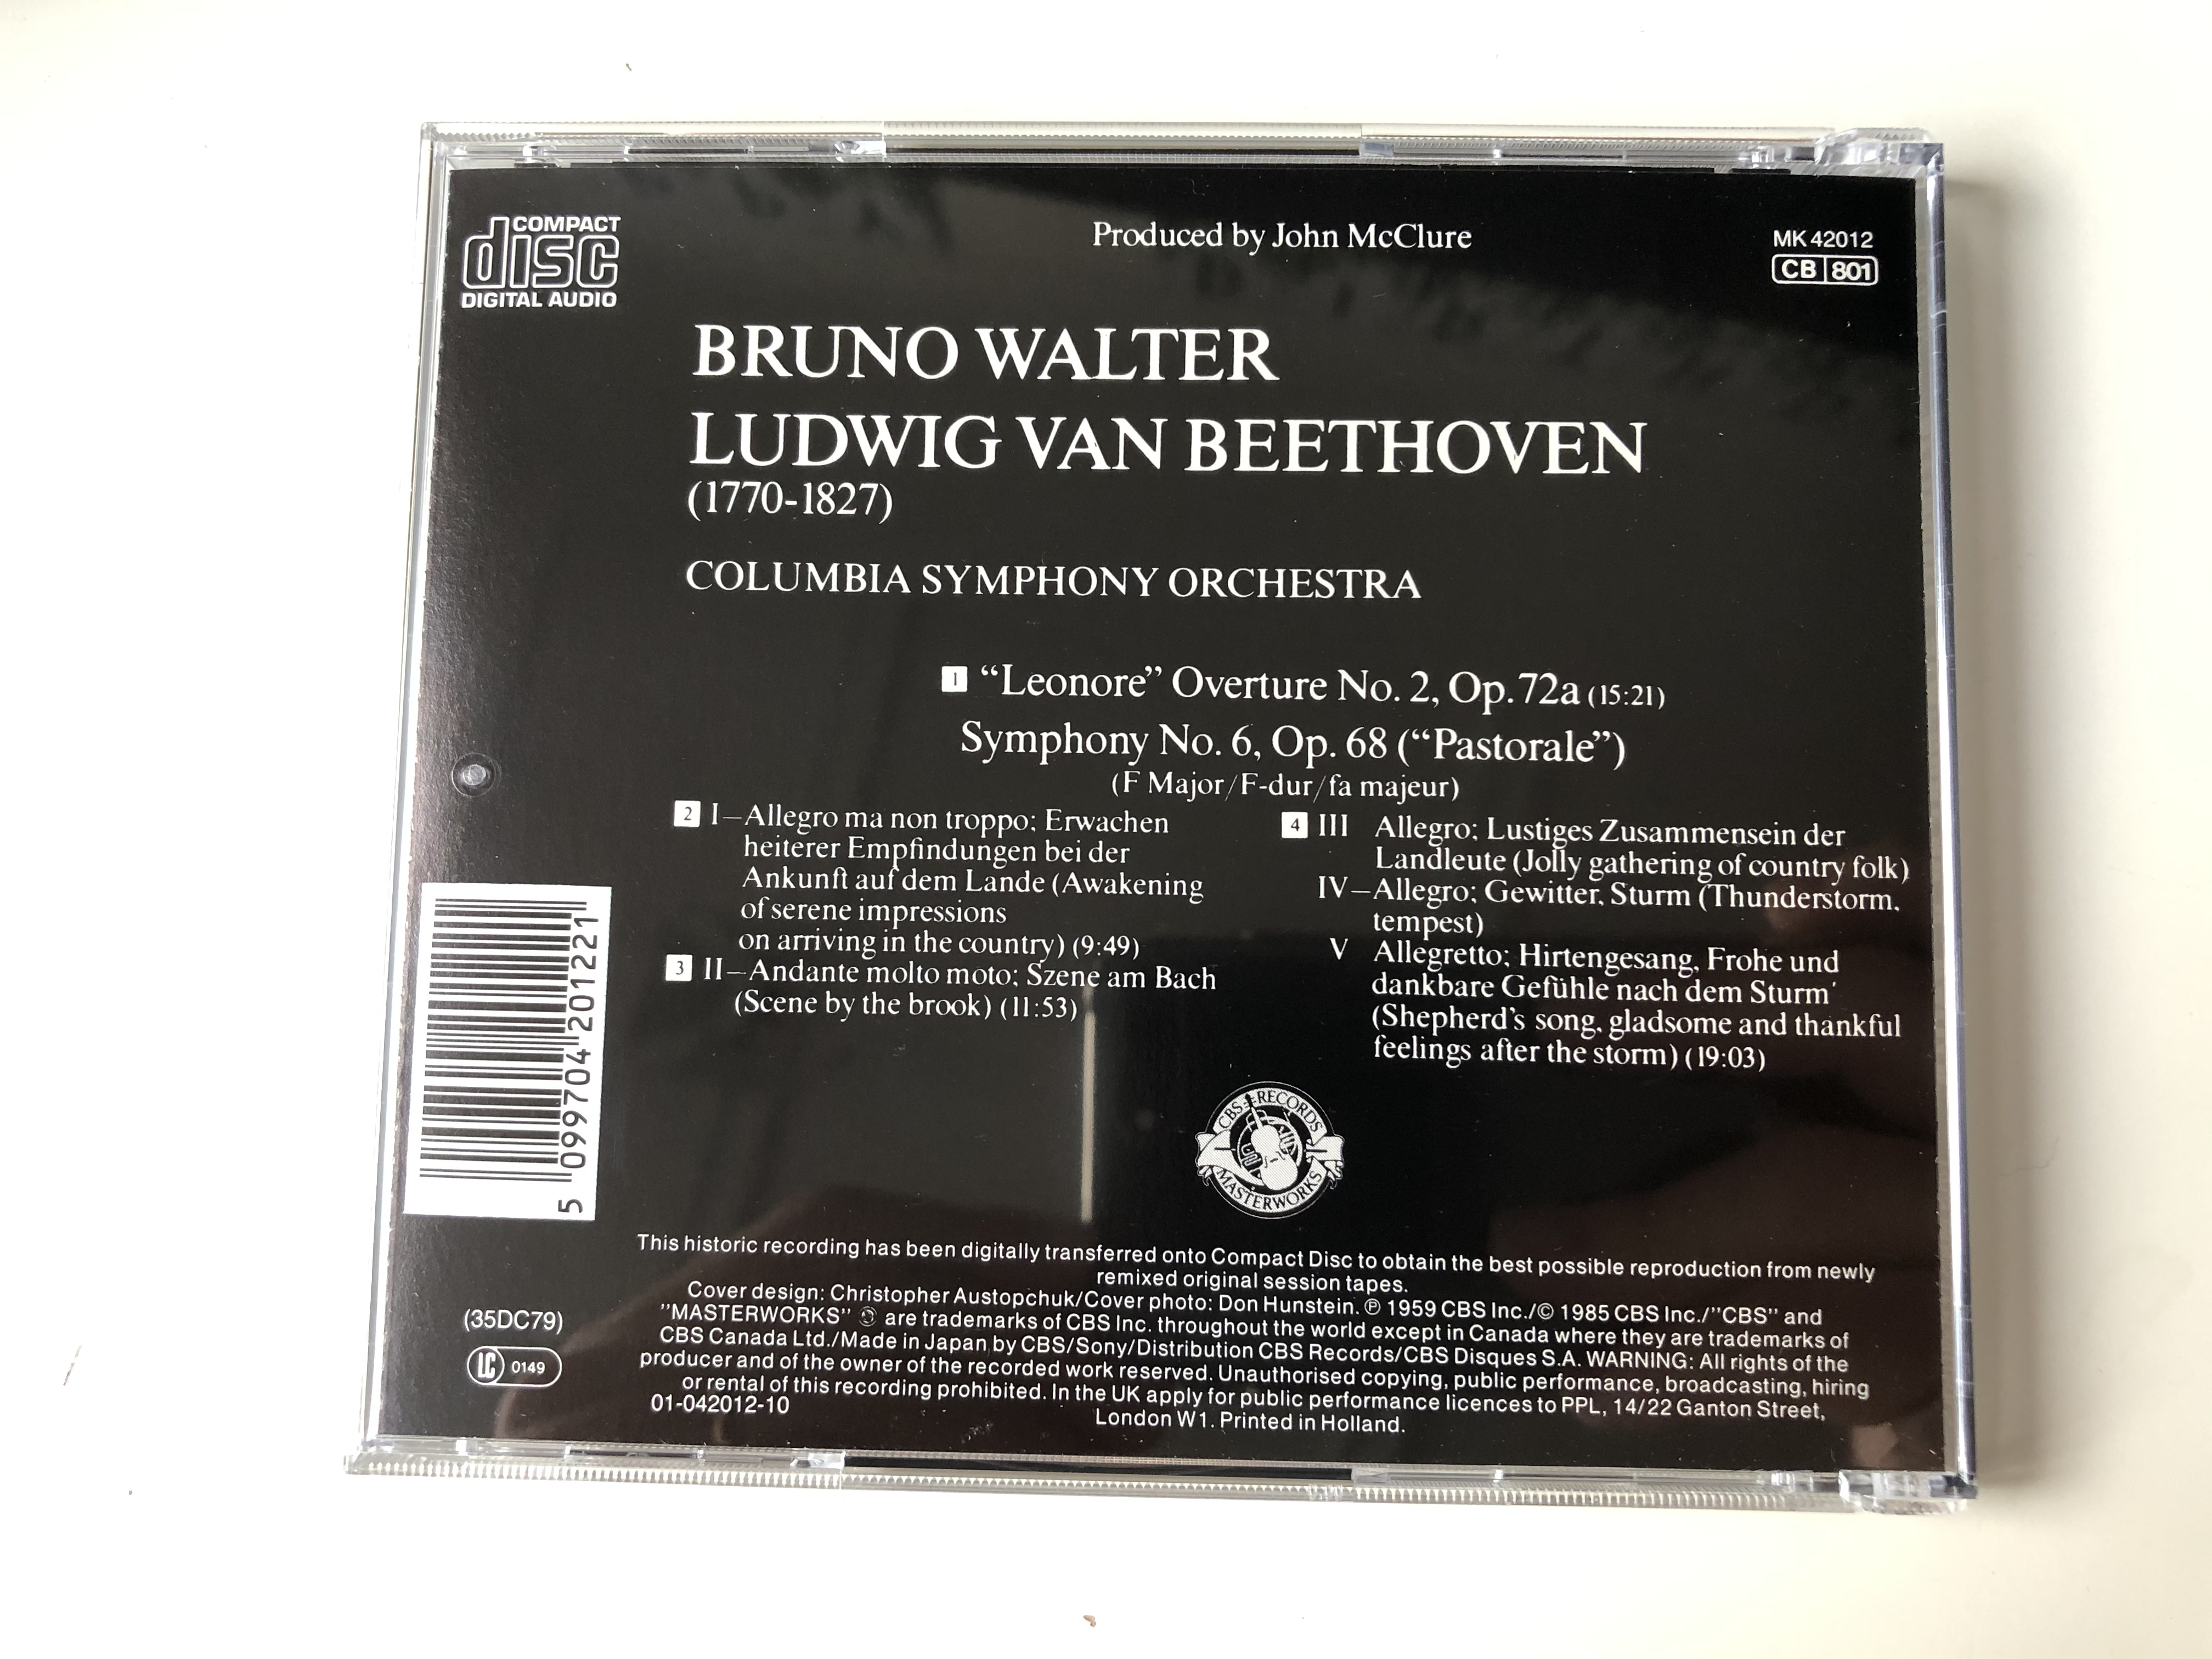 bruno-walter-beethoven-symphony-no.-6-op.68-pastorale-lenore-overture-no.2-op.-72a-columbia-symphony-orchestra-cbs-masterworks-audio-cd-1985-mk-42012-4-.jpg